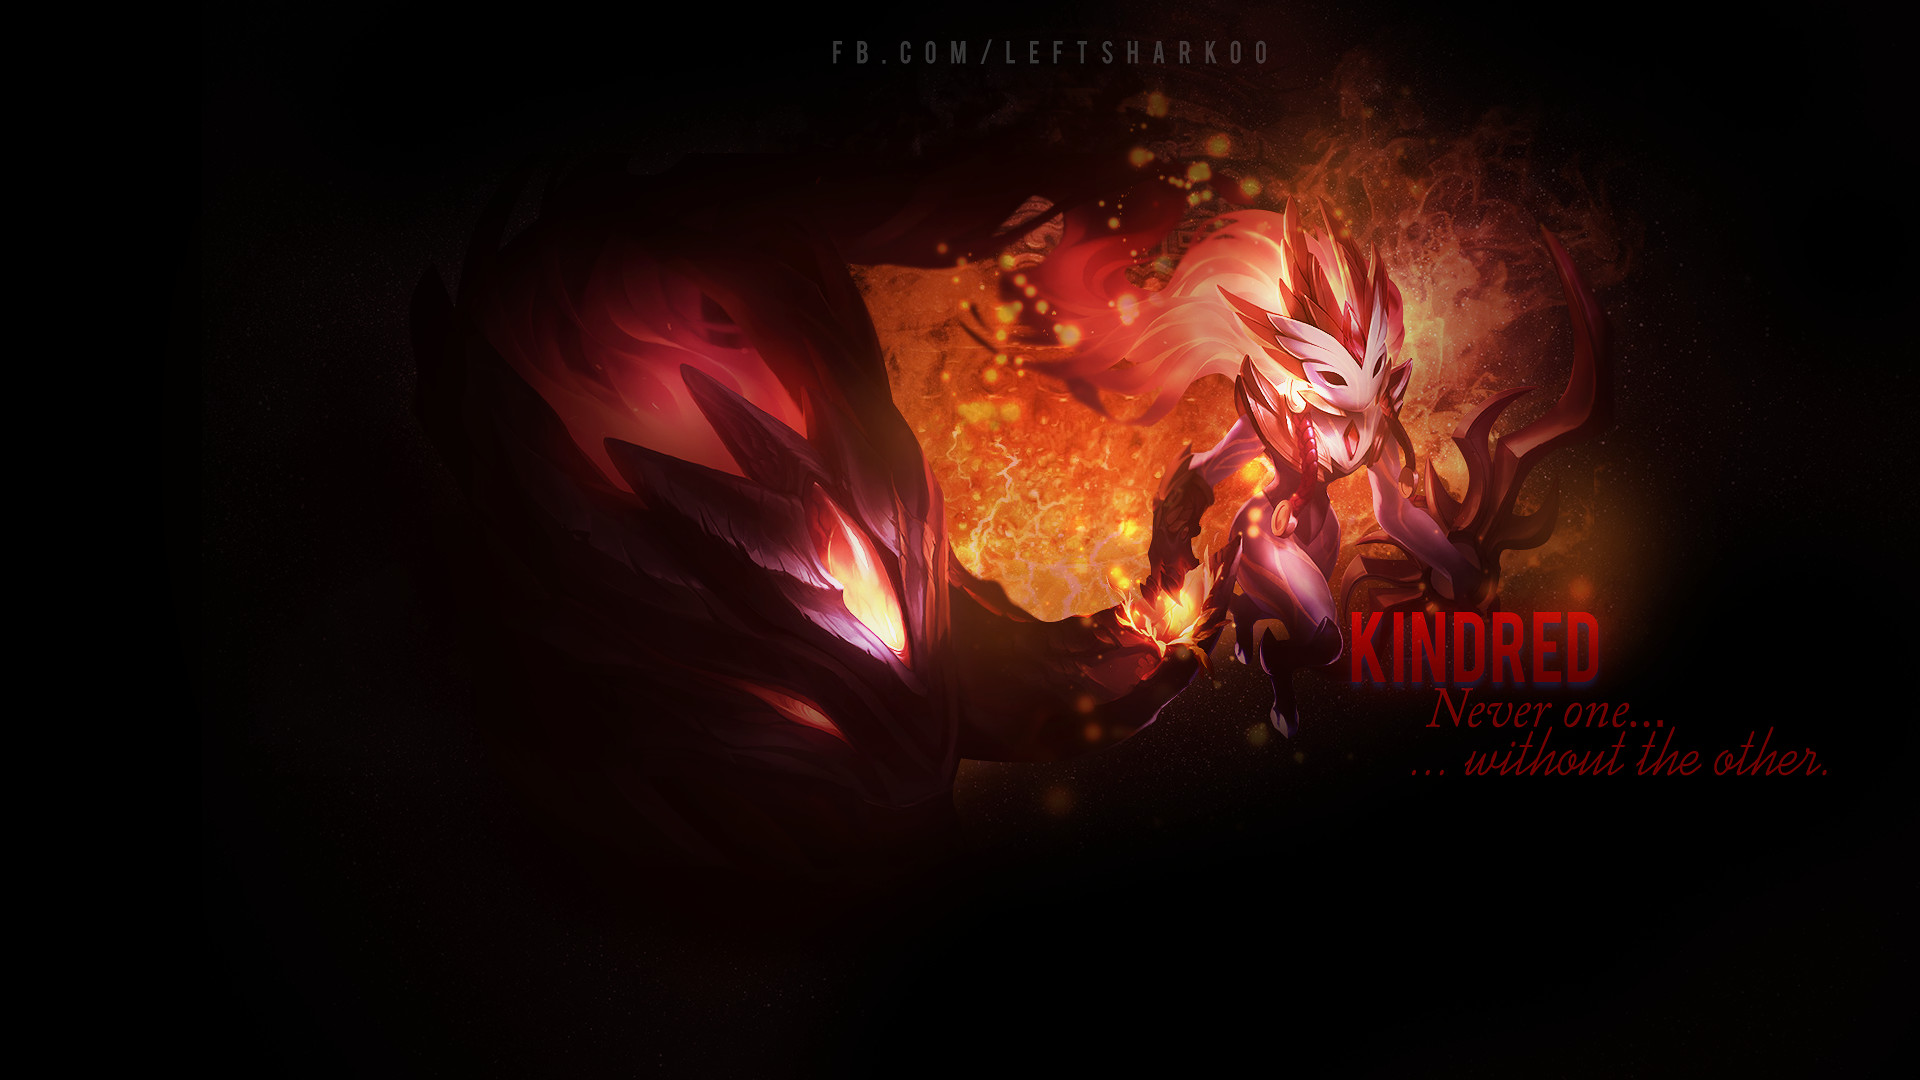 1920x1080 ... Kindred wallpaper League of Legends by LeftLucy